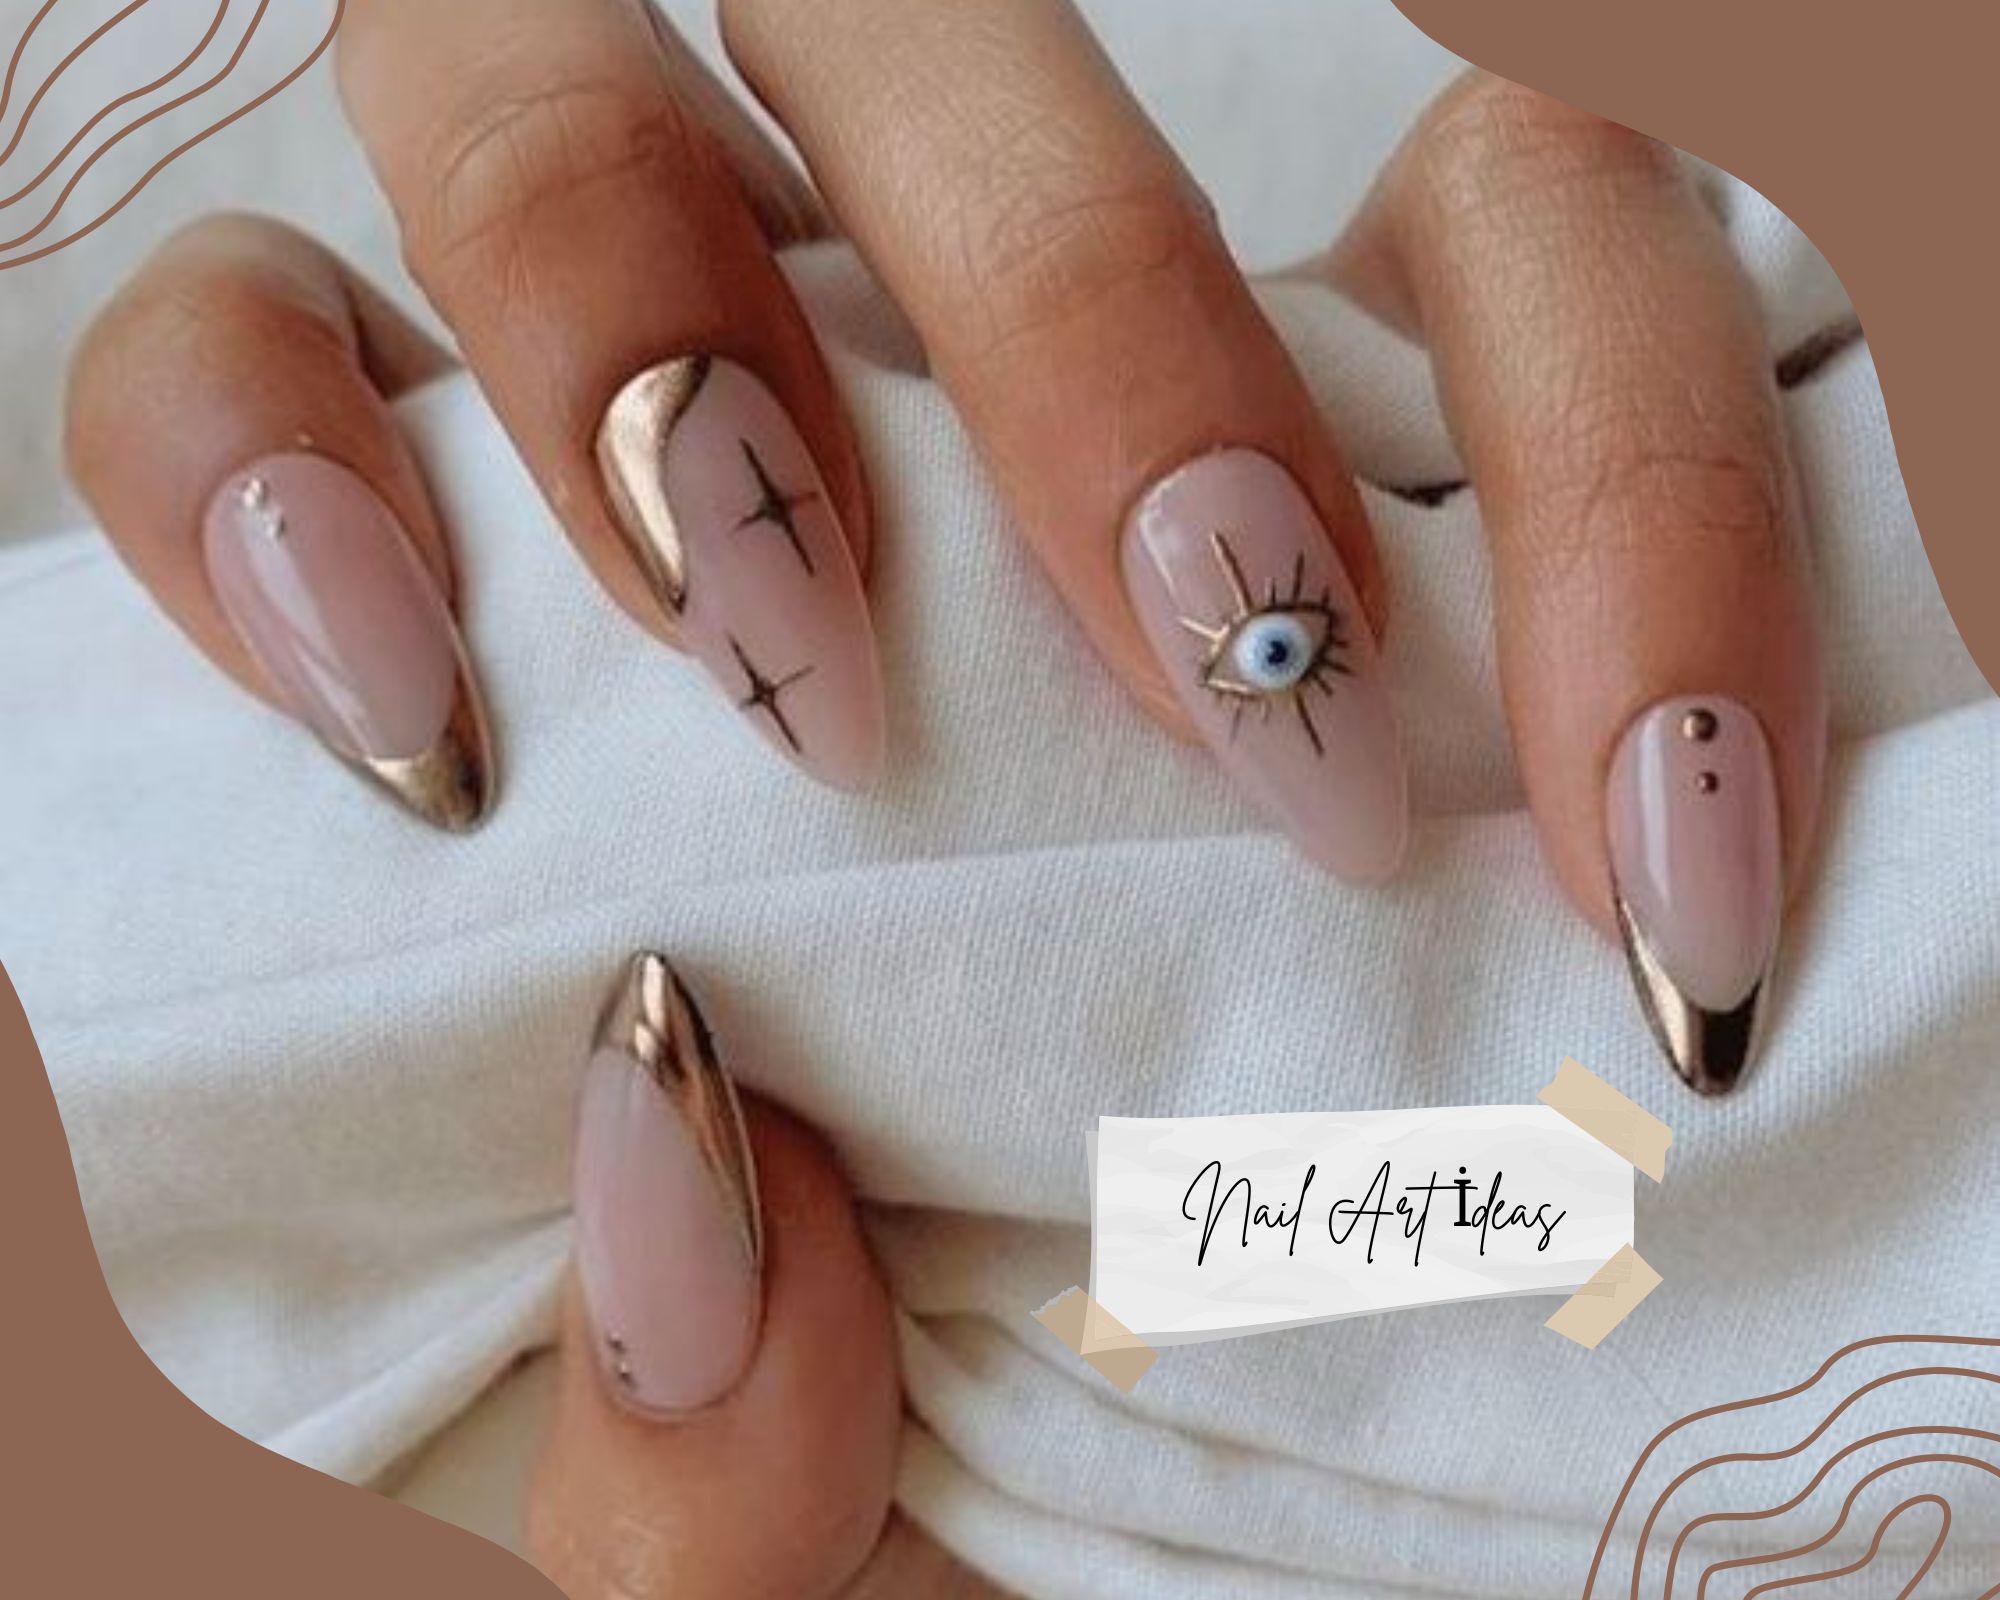 Discover The Latest Nail Trends With Blog - The 20 Nail Story